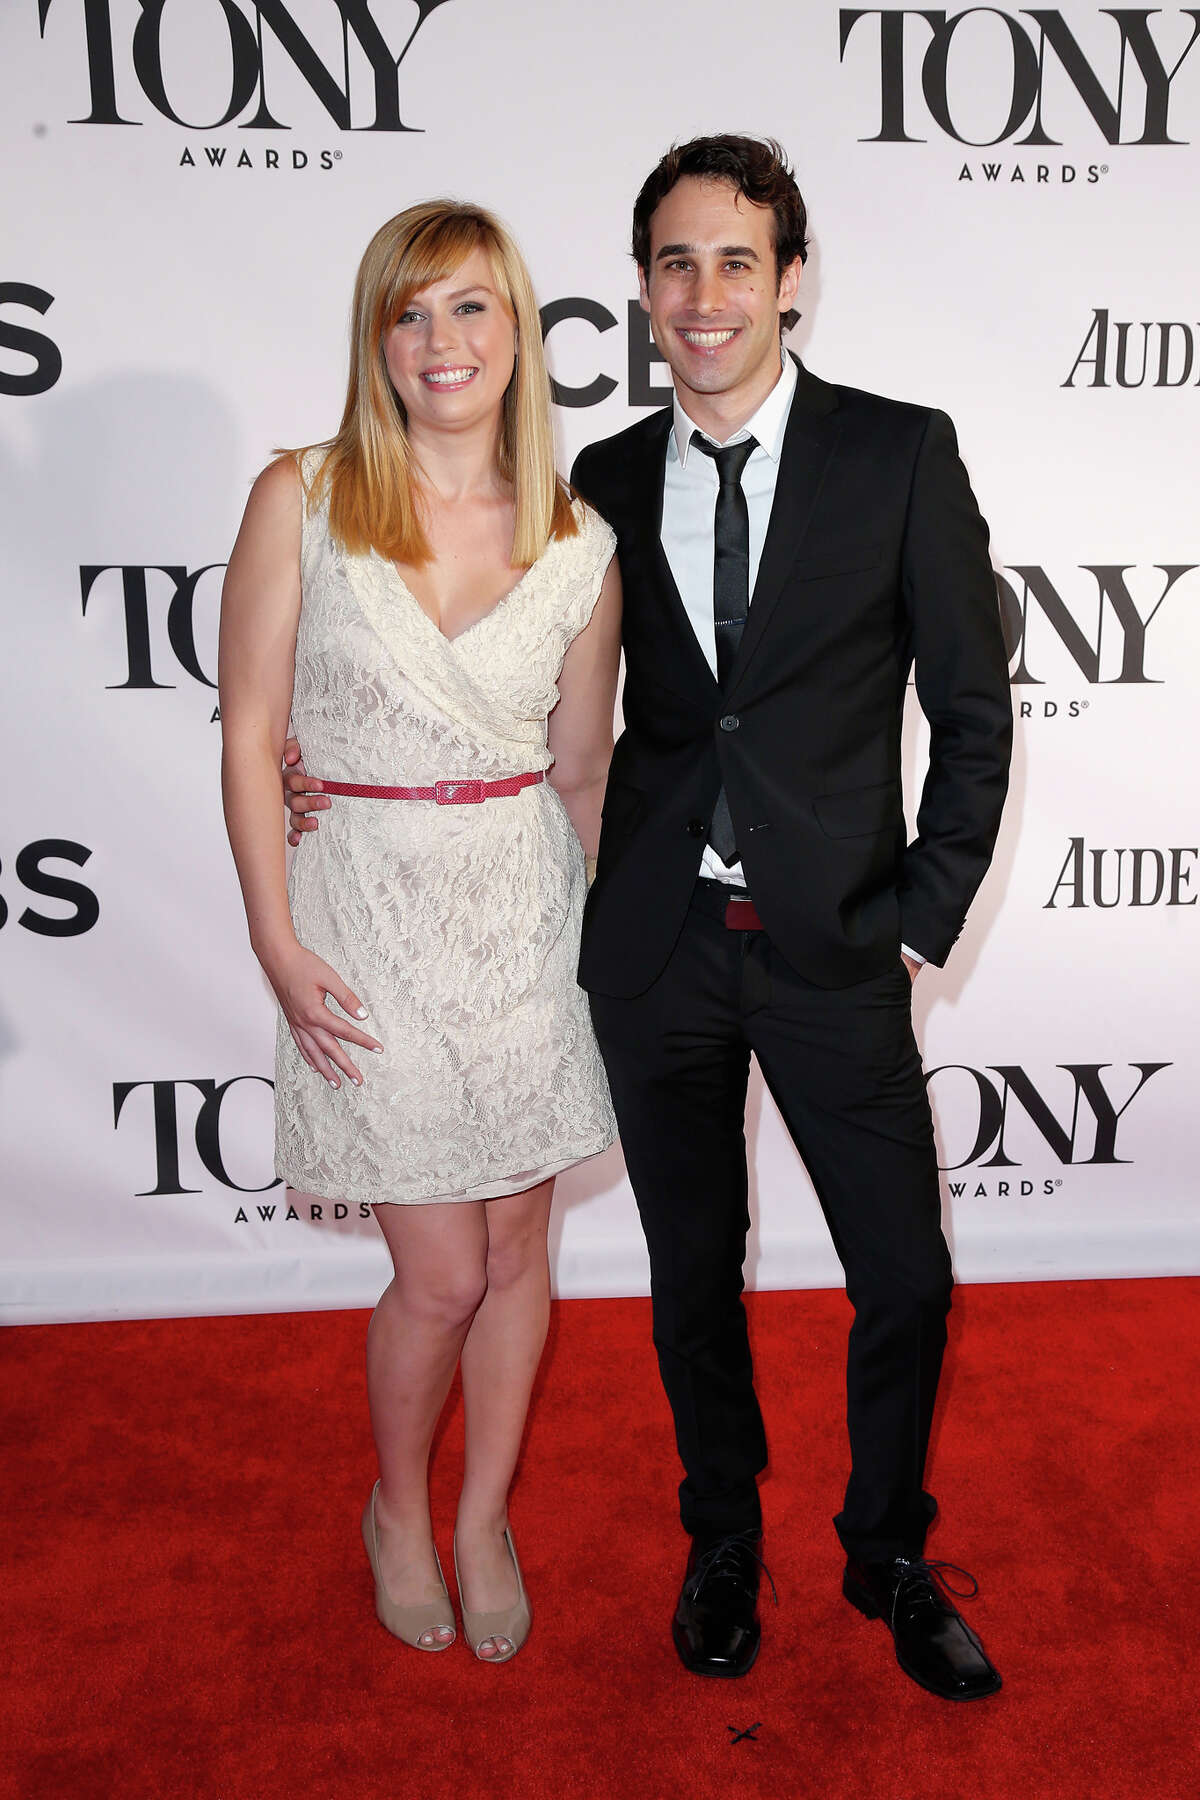 NEW YORK, NY - JUNE 09: Nexxus contest winner Julie Christianson and guest Mark Oxman attend The 67th Annual Tony Awards at Radio City Music Hall on June 9, 2013 in New York City. (Photo by Jemal Countess/Getty Images for Nexxus)